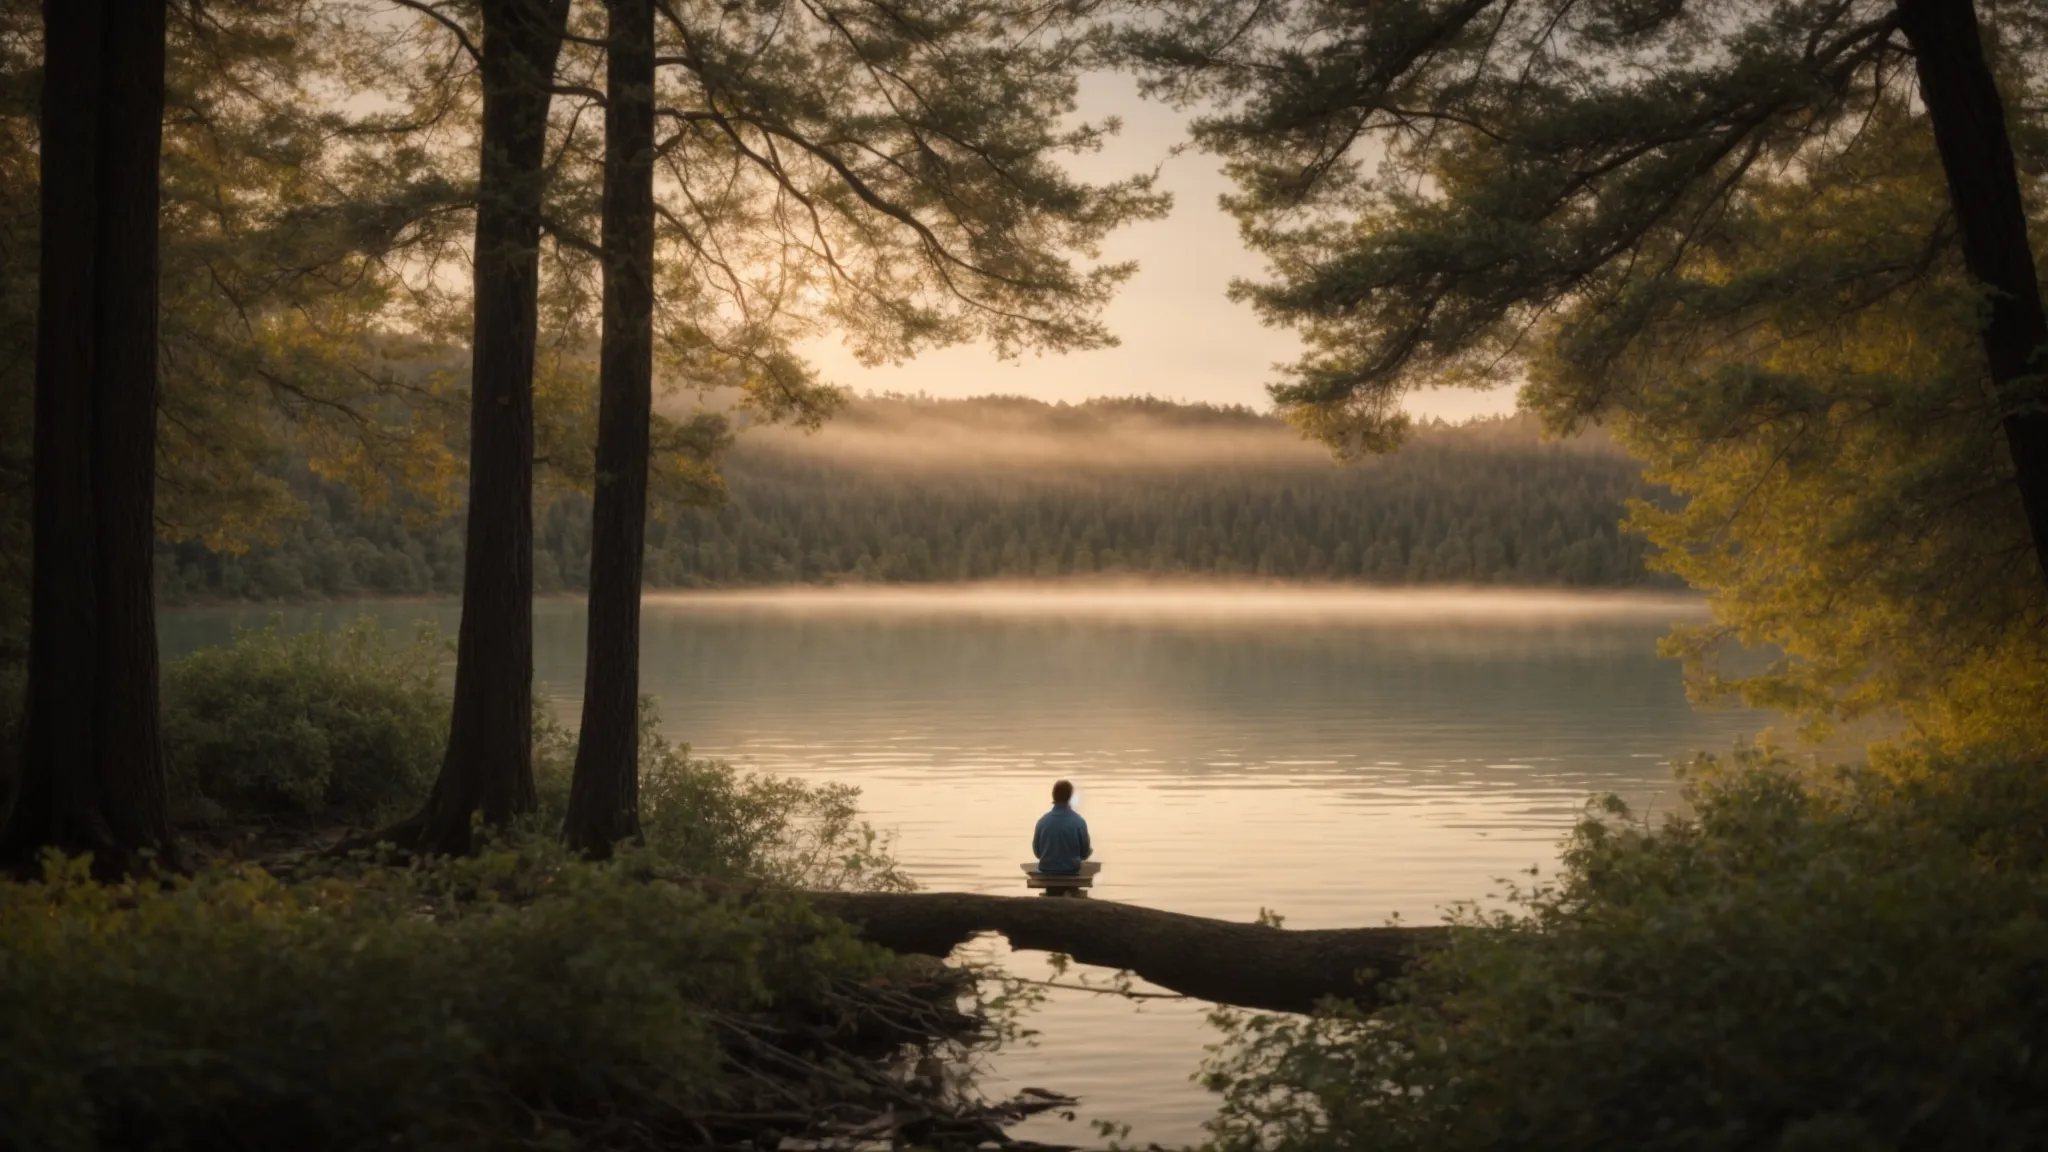 a serene lake at dawn, surrounded by trees, with a lone person seated on the shore in meditation.